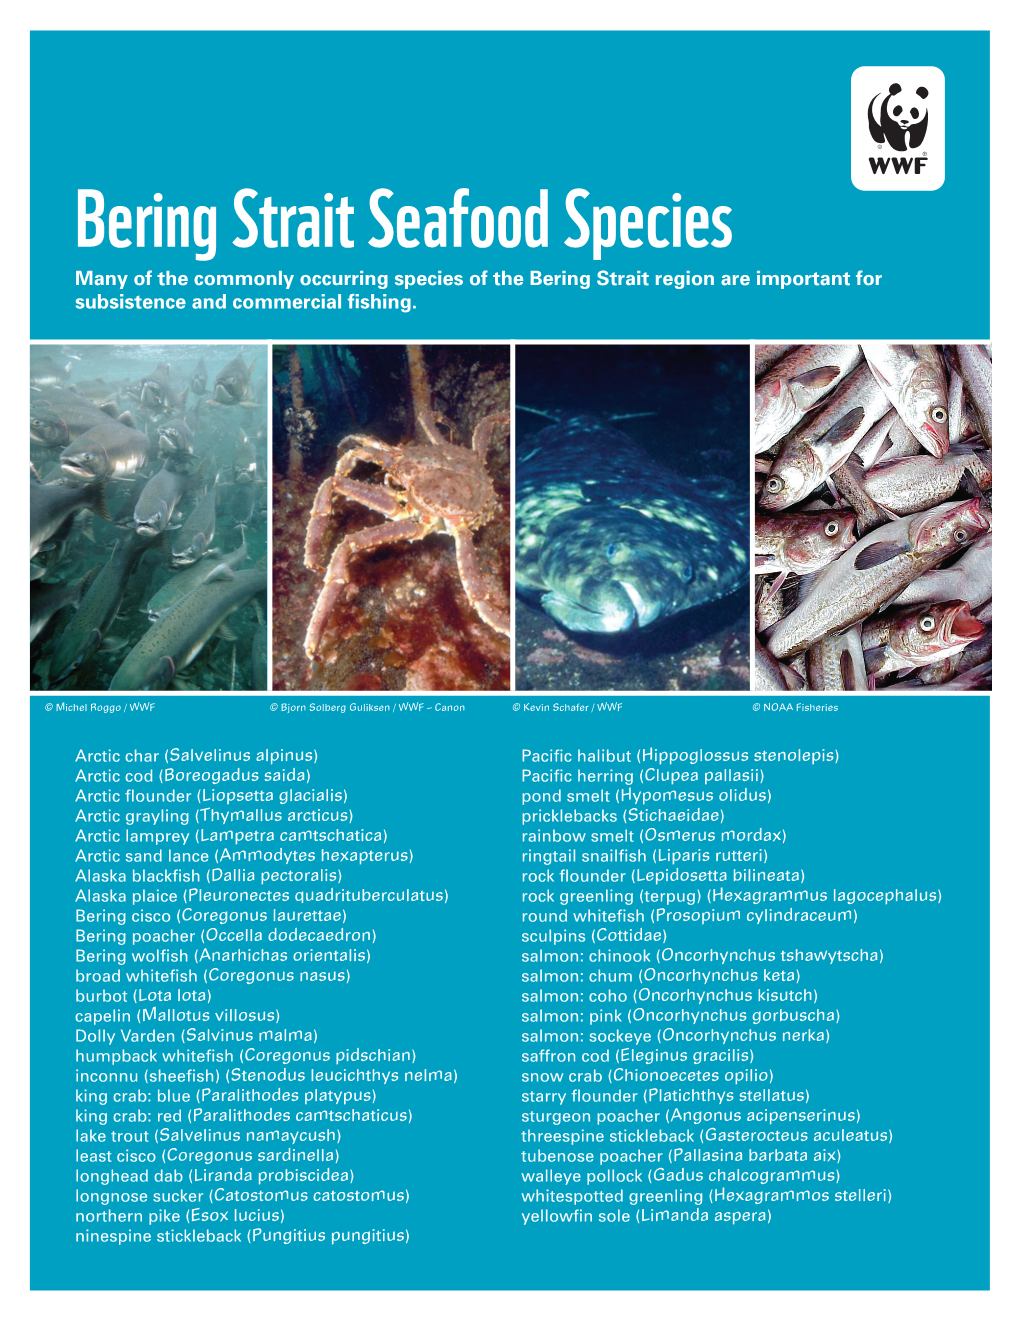 Bering Strait Seafood Species Many of the Commonly Occurring Species of the Bering Strait Region Are Important for Subsistence and Commercial Fishing